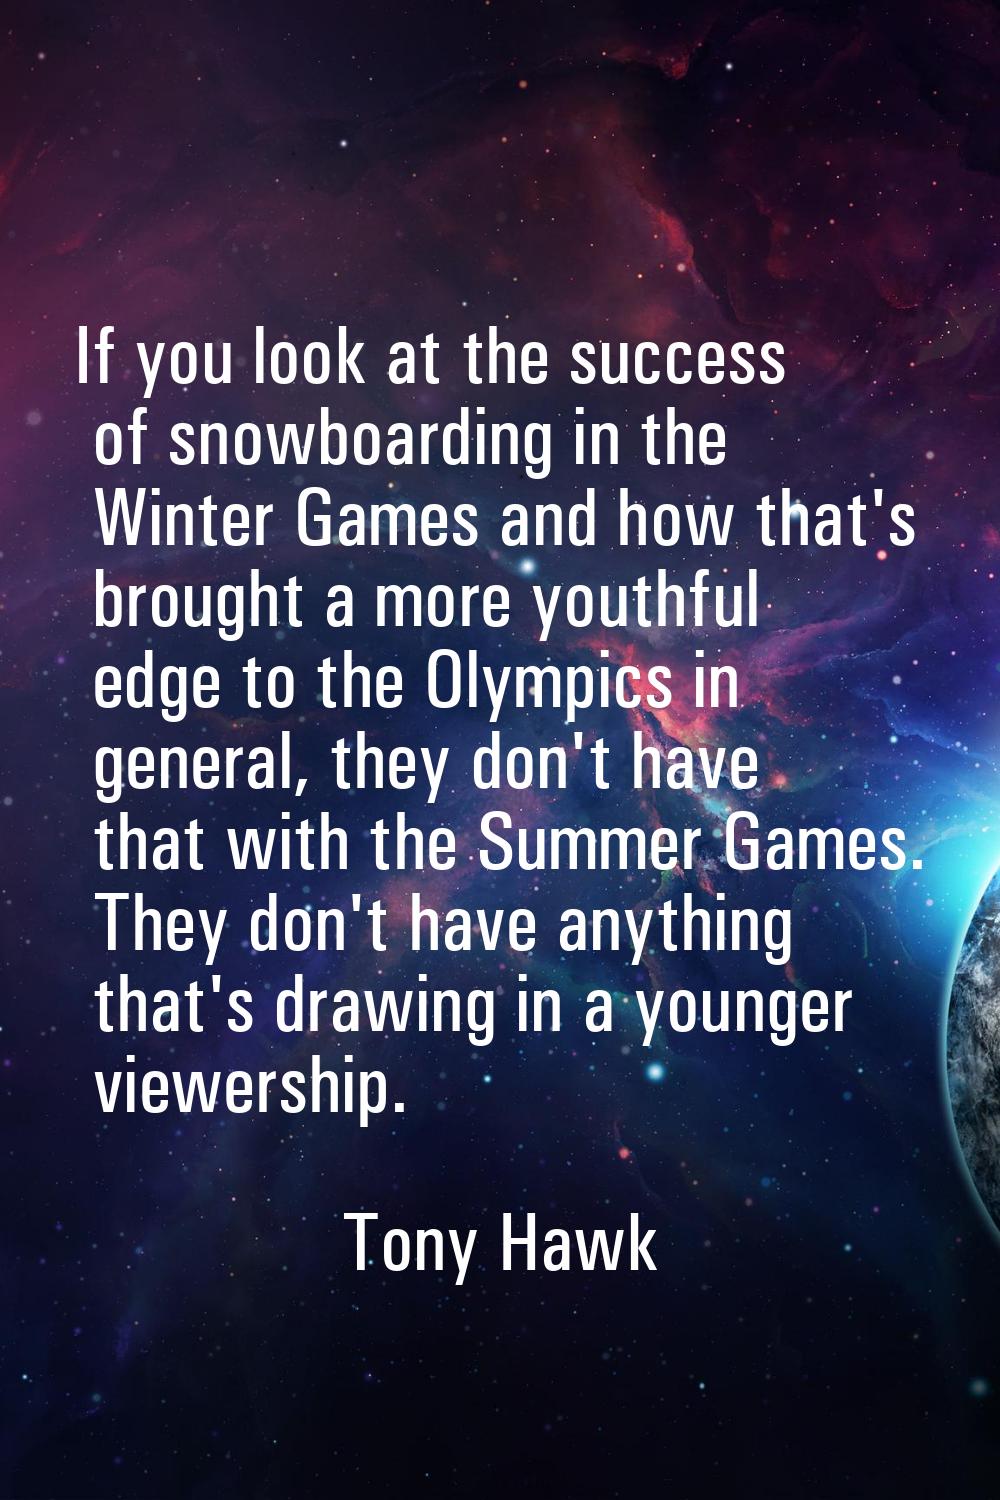 If you look at the success of snowboarding in the Winter Games and how that's brought a more youthf